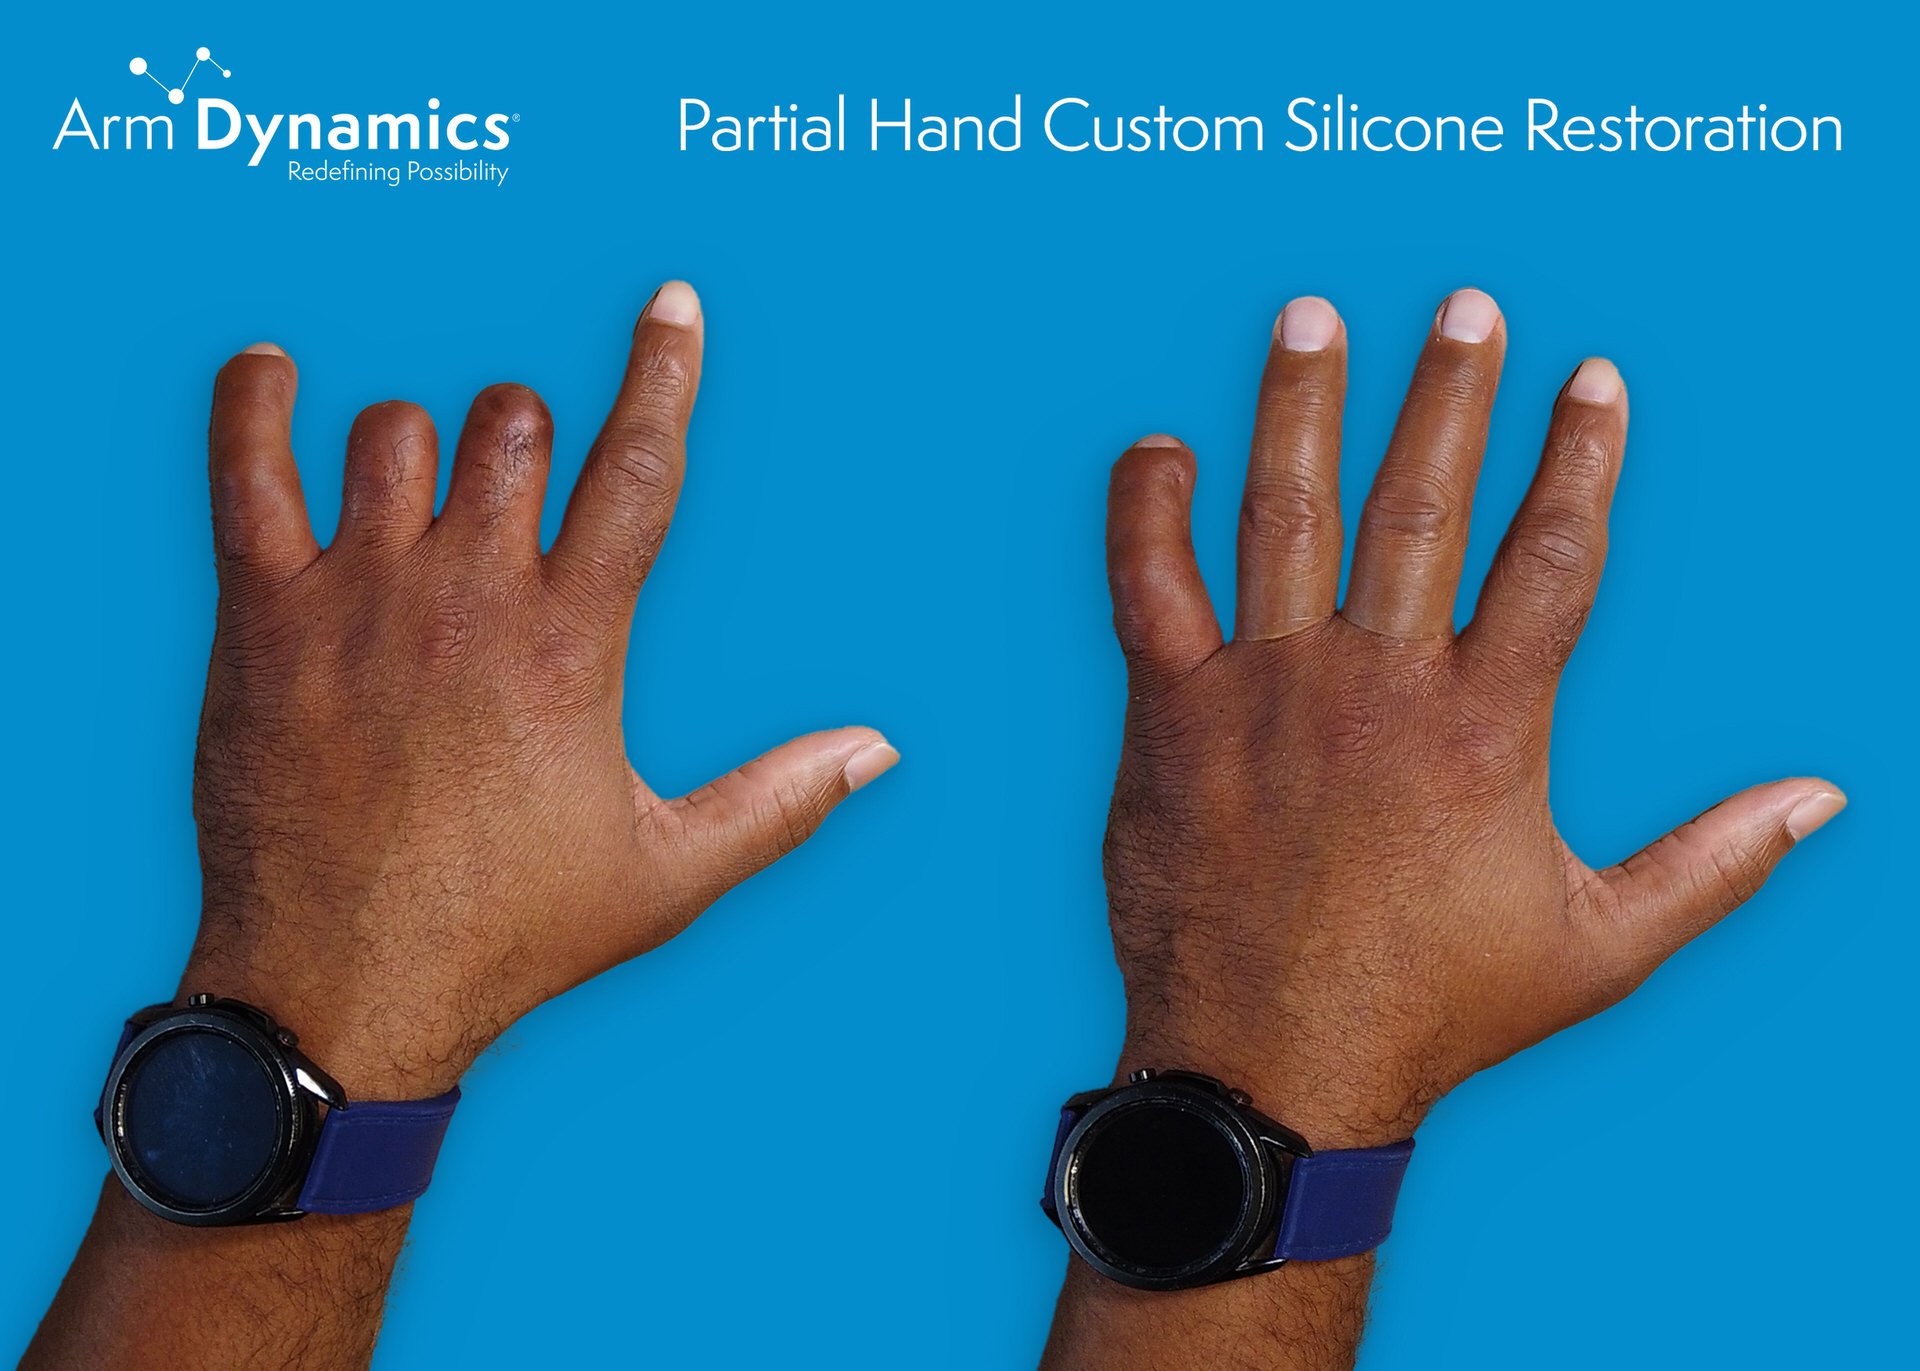 Partial hand custom silicone passive restoration. Before and after.